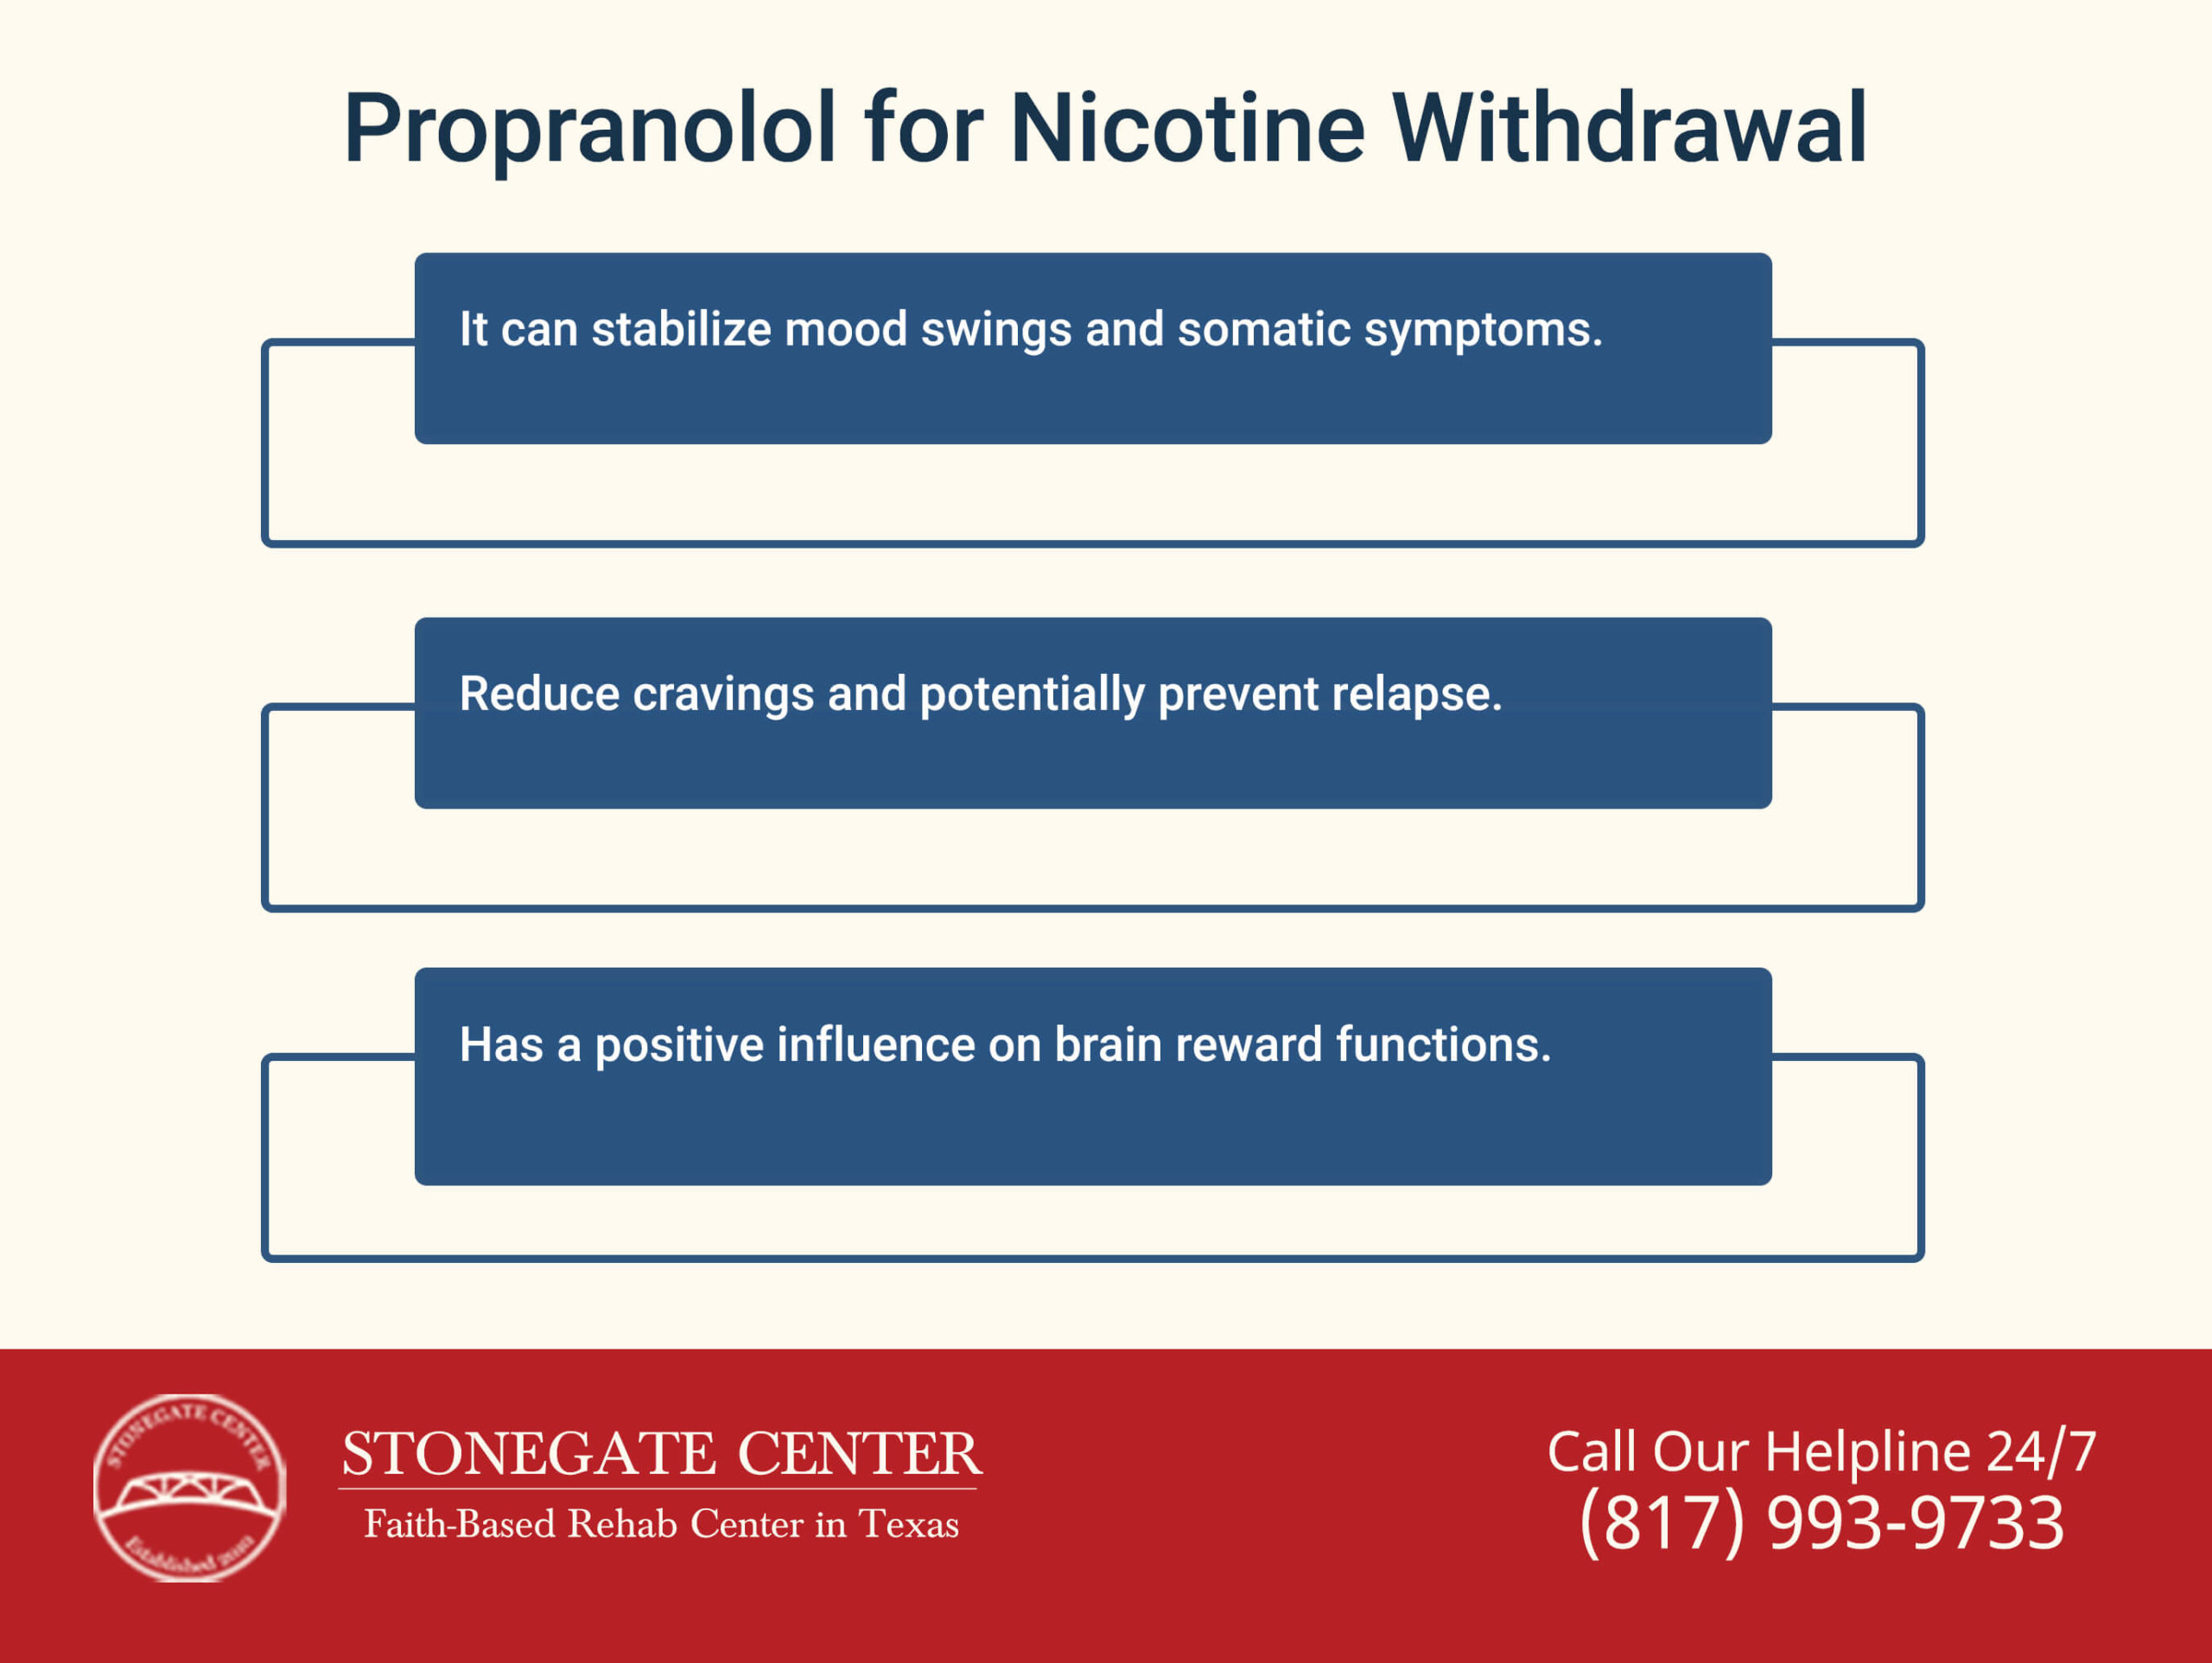 Stonegate Center Blog - Is Propranolol One of the Most Common Medications Given at Detox Centers? - Propranolol for Nicotine Withdrawal